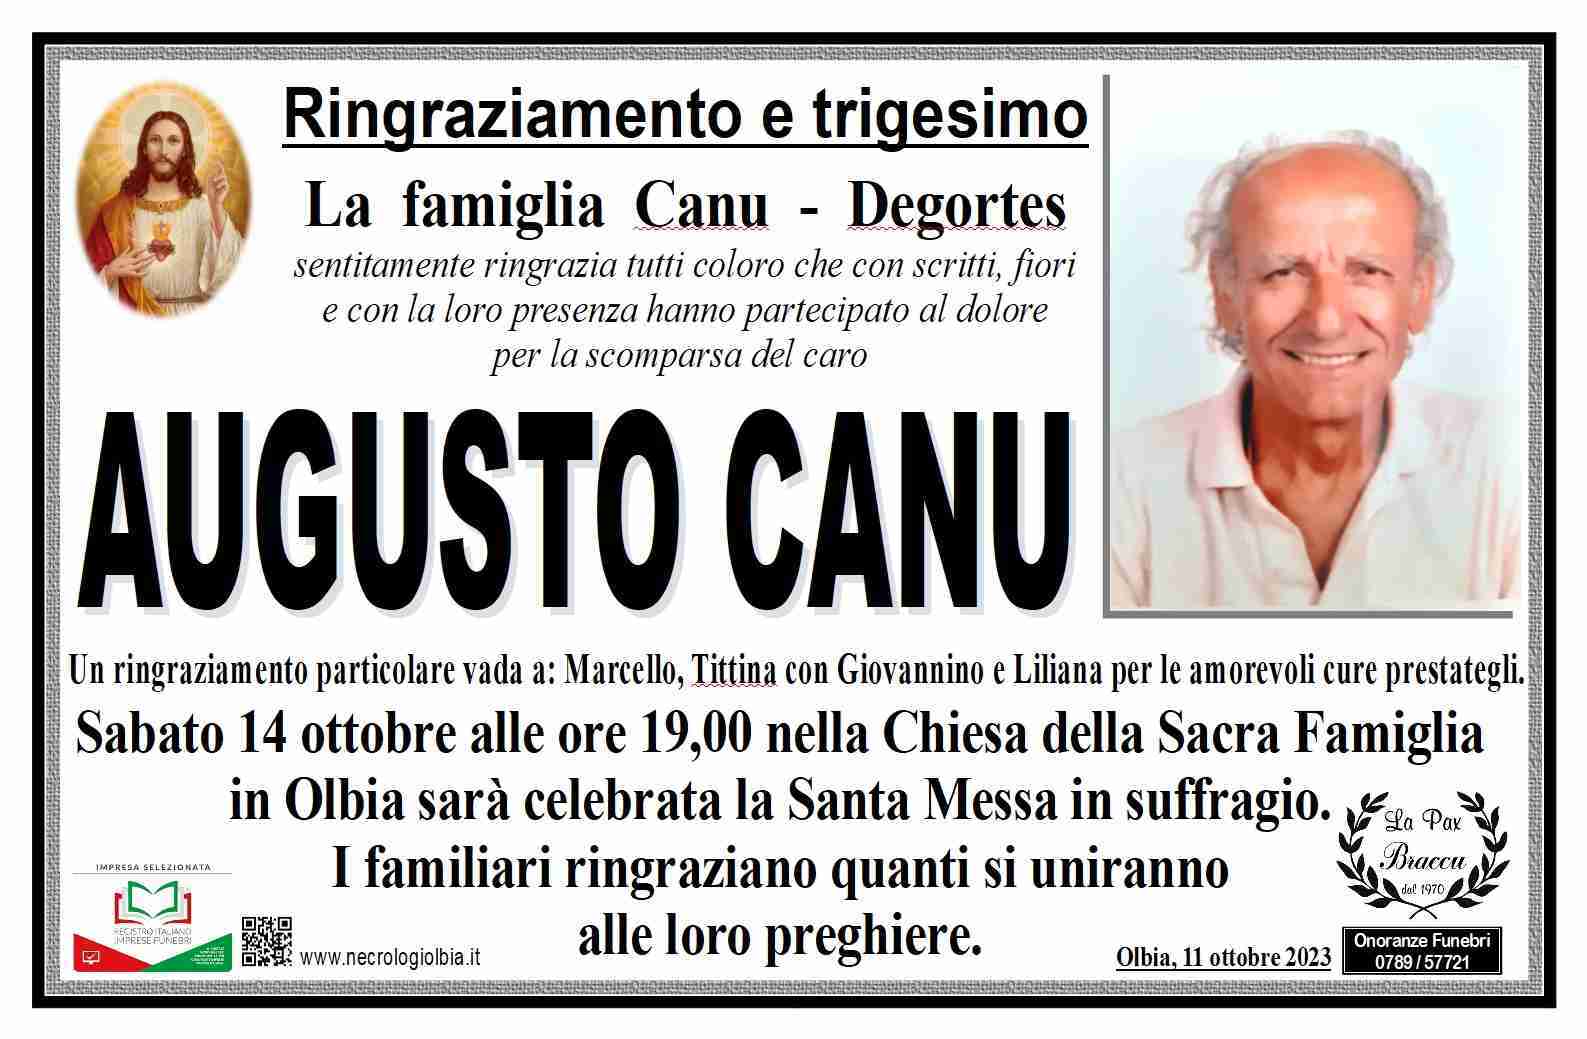 Augusto Canu